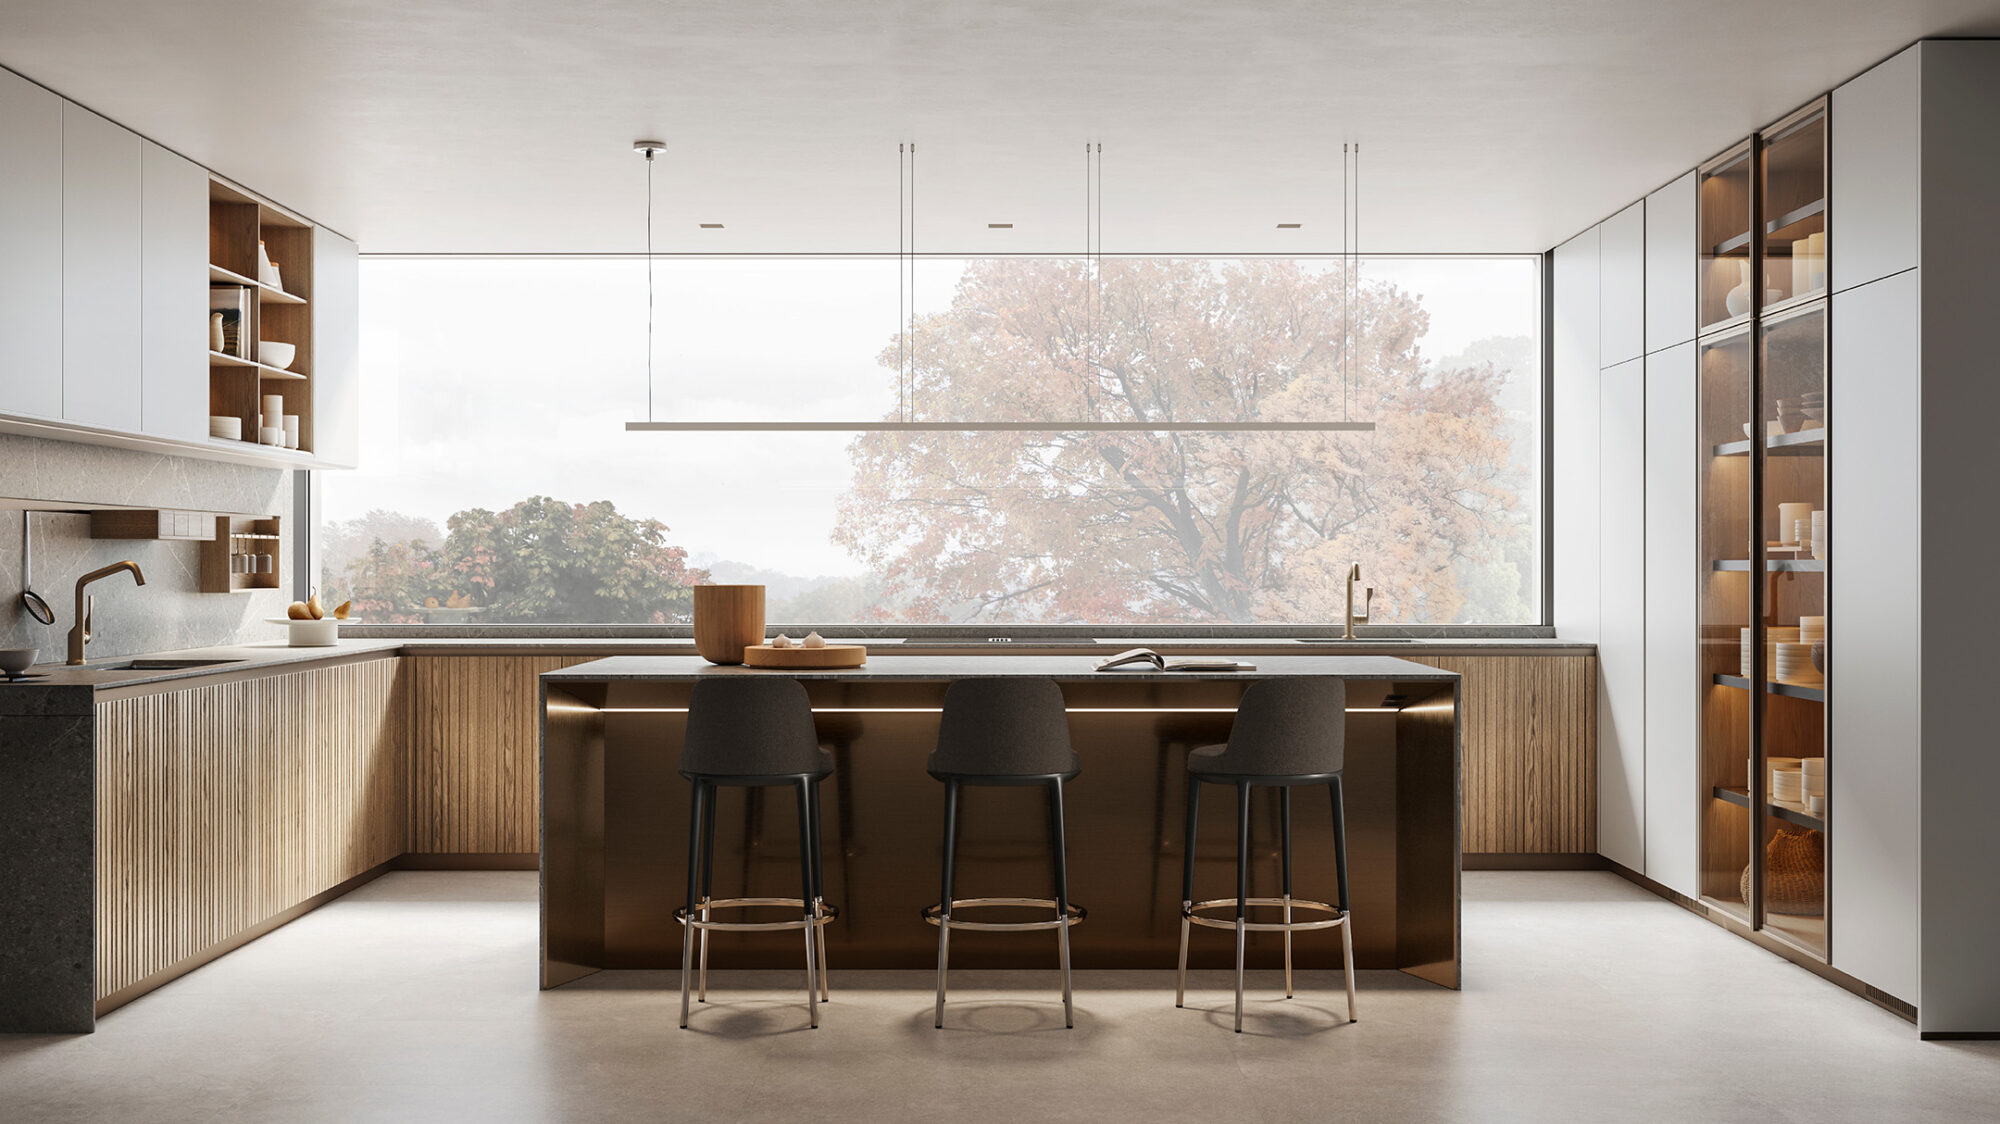 Sleek kitchen featuring wooden cabinets, stools, and a kitchen island with seating.